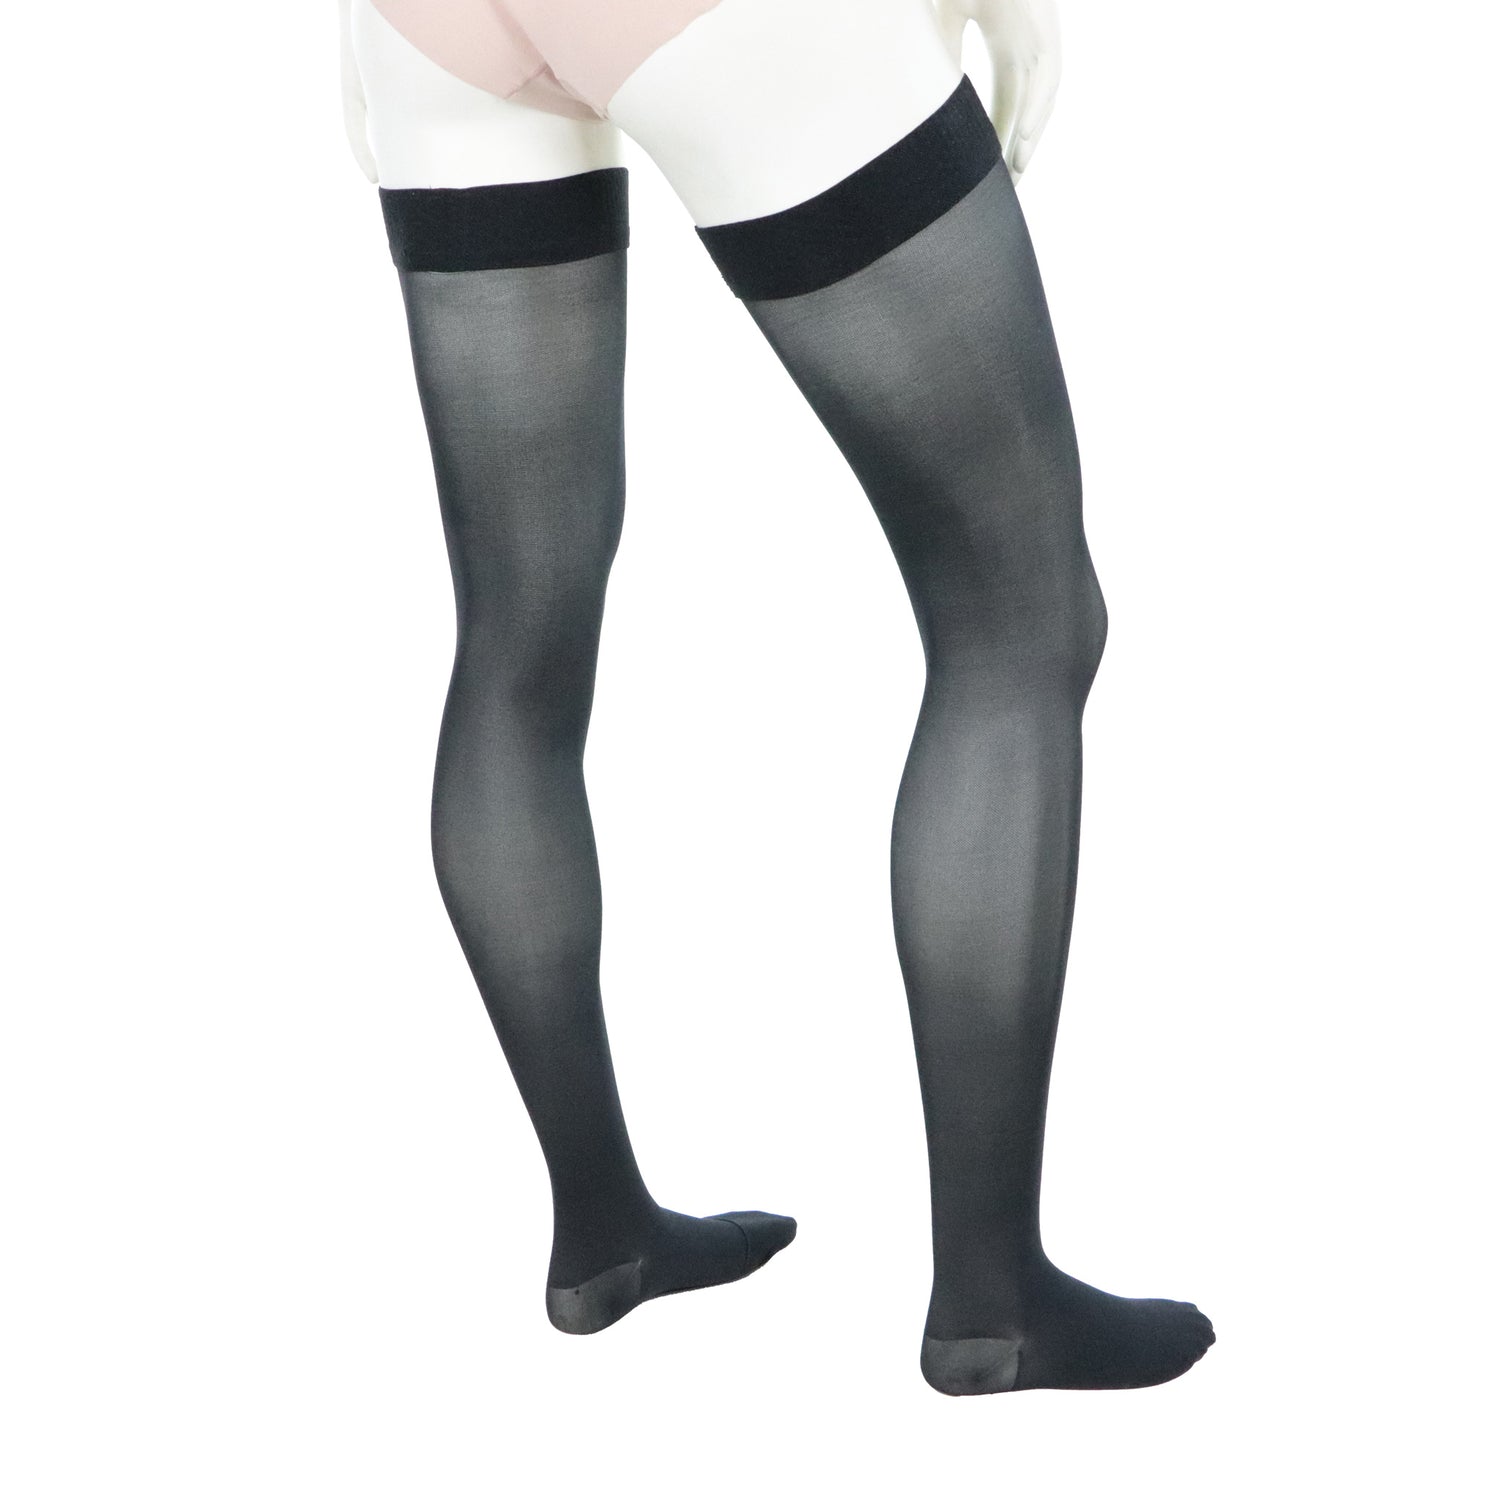 Thigh-High Stockings Women Hold Up Compression Socks 20-30 mmgh